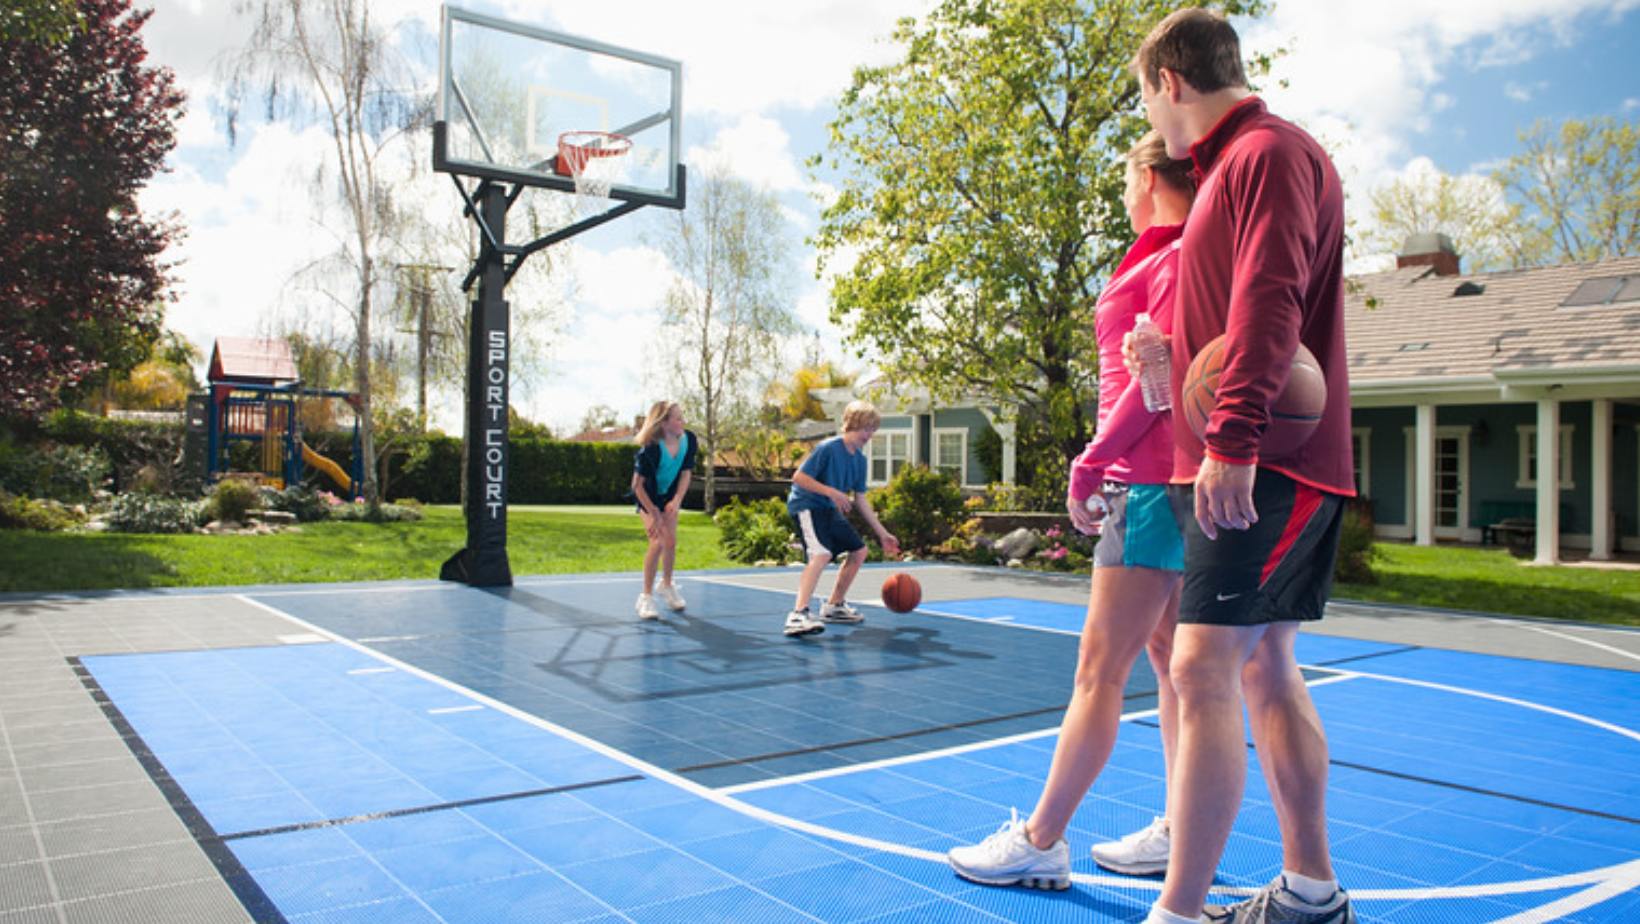 The Ultimate Guide to Buying the Best Outdoor Basketball Court Flooring